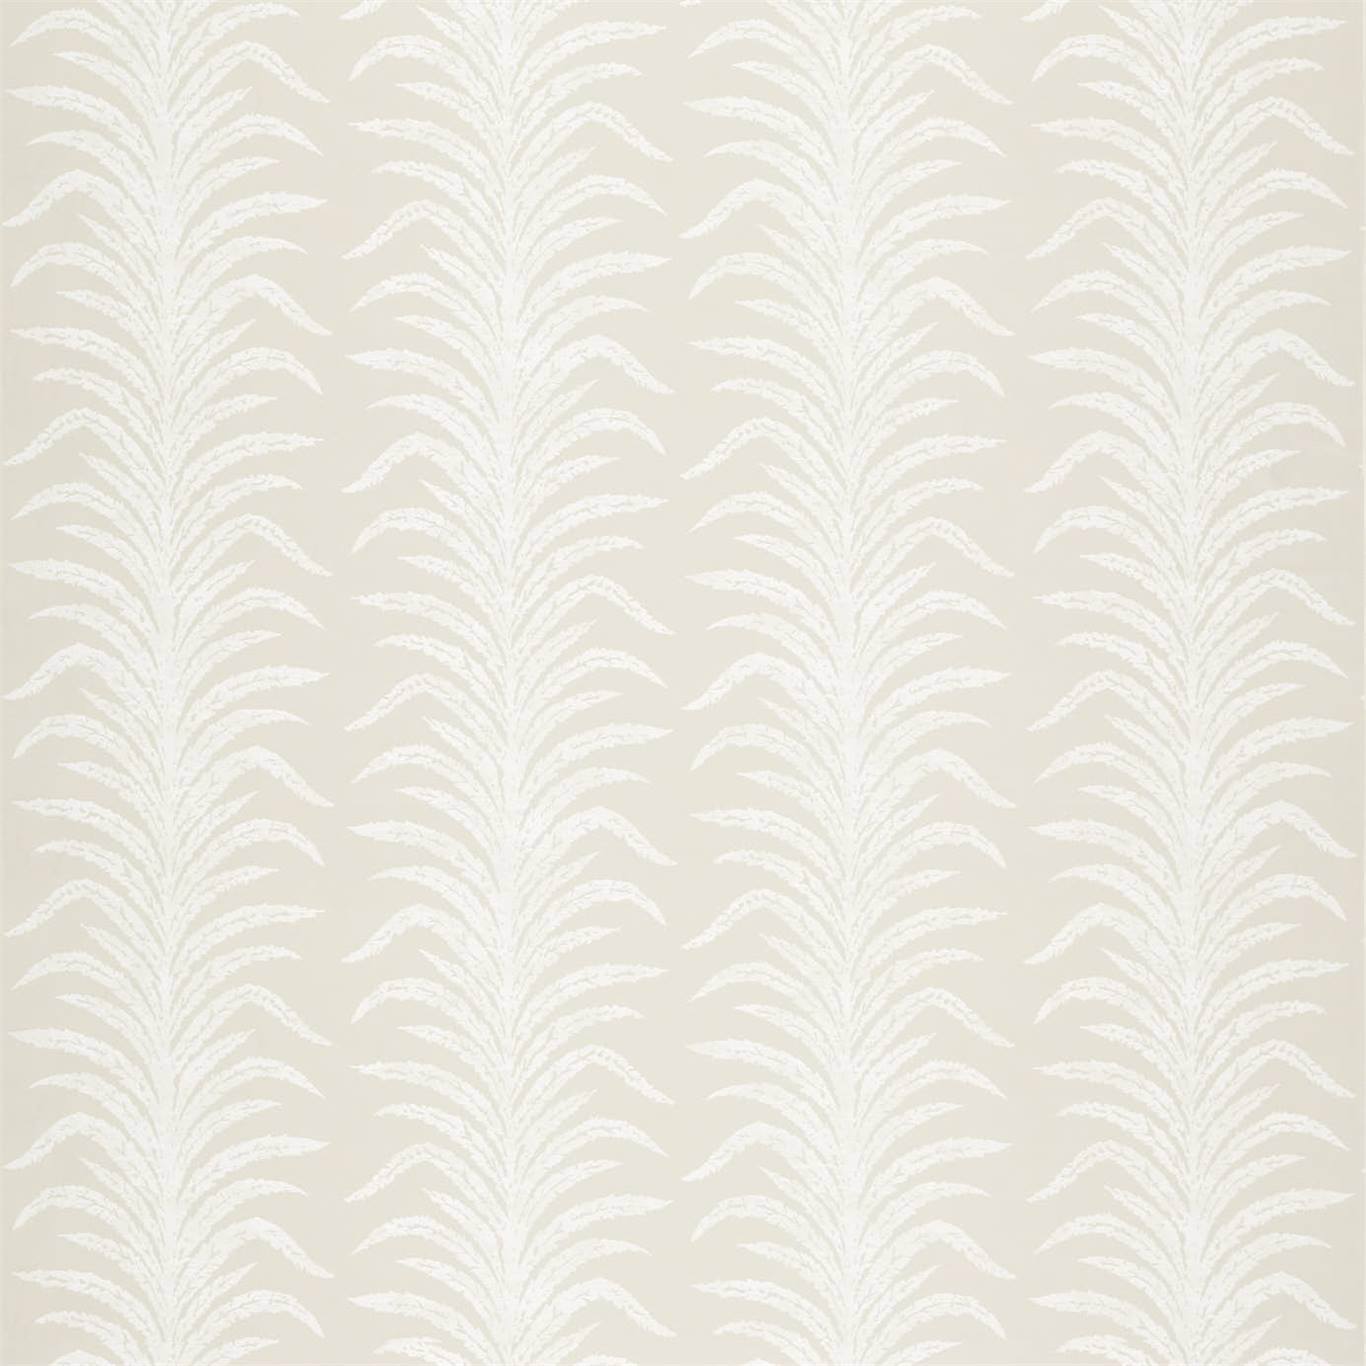 Tree Fern Weave Orchid White Fabric by SAN